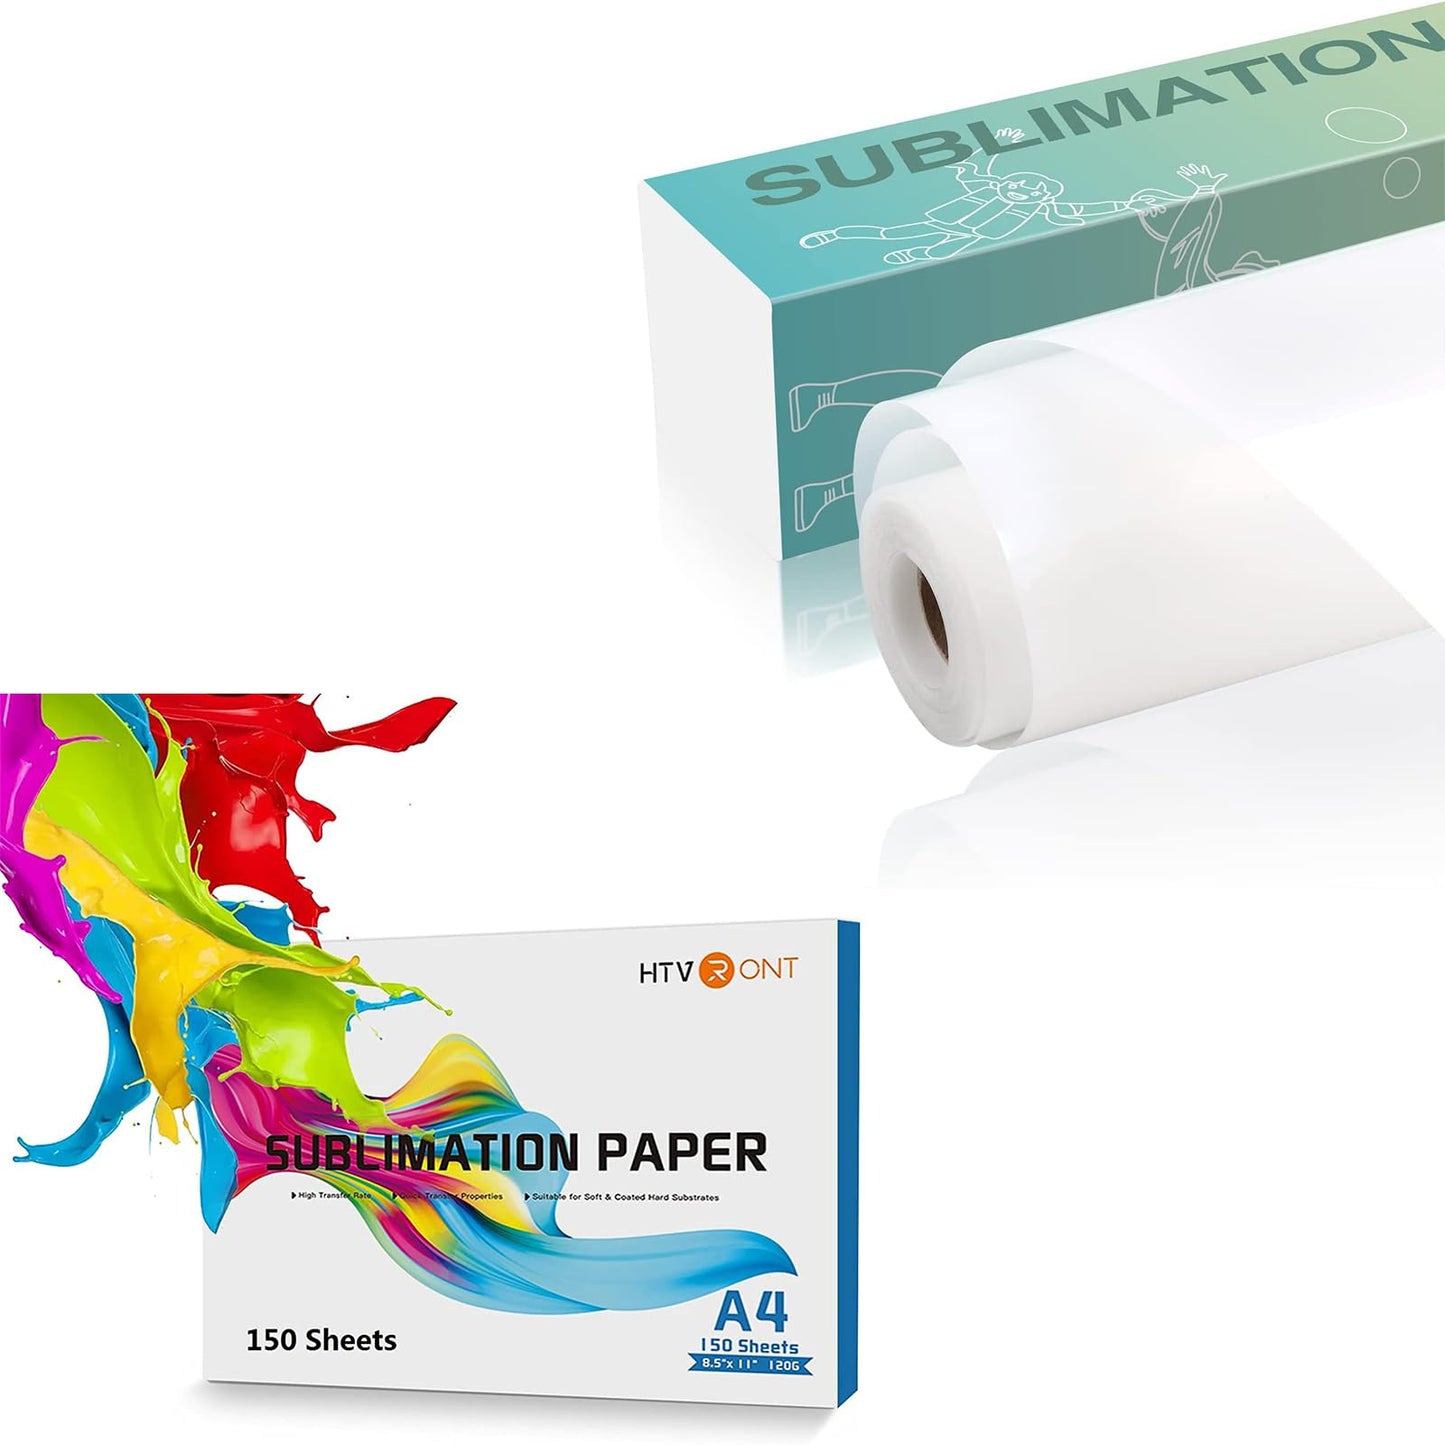 HTVRONT Sublimation Paper 8.5 x 11 inches - 150 Sheets +12" X 20FT Clear HTV Vinyl for Sublimation